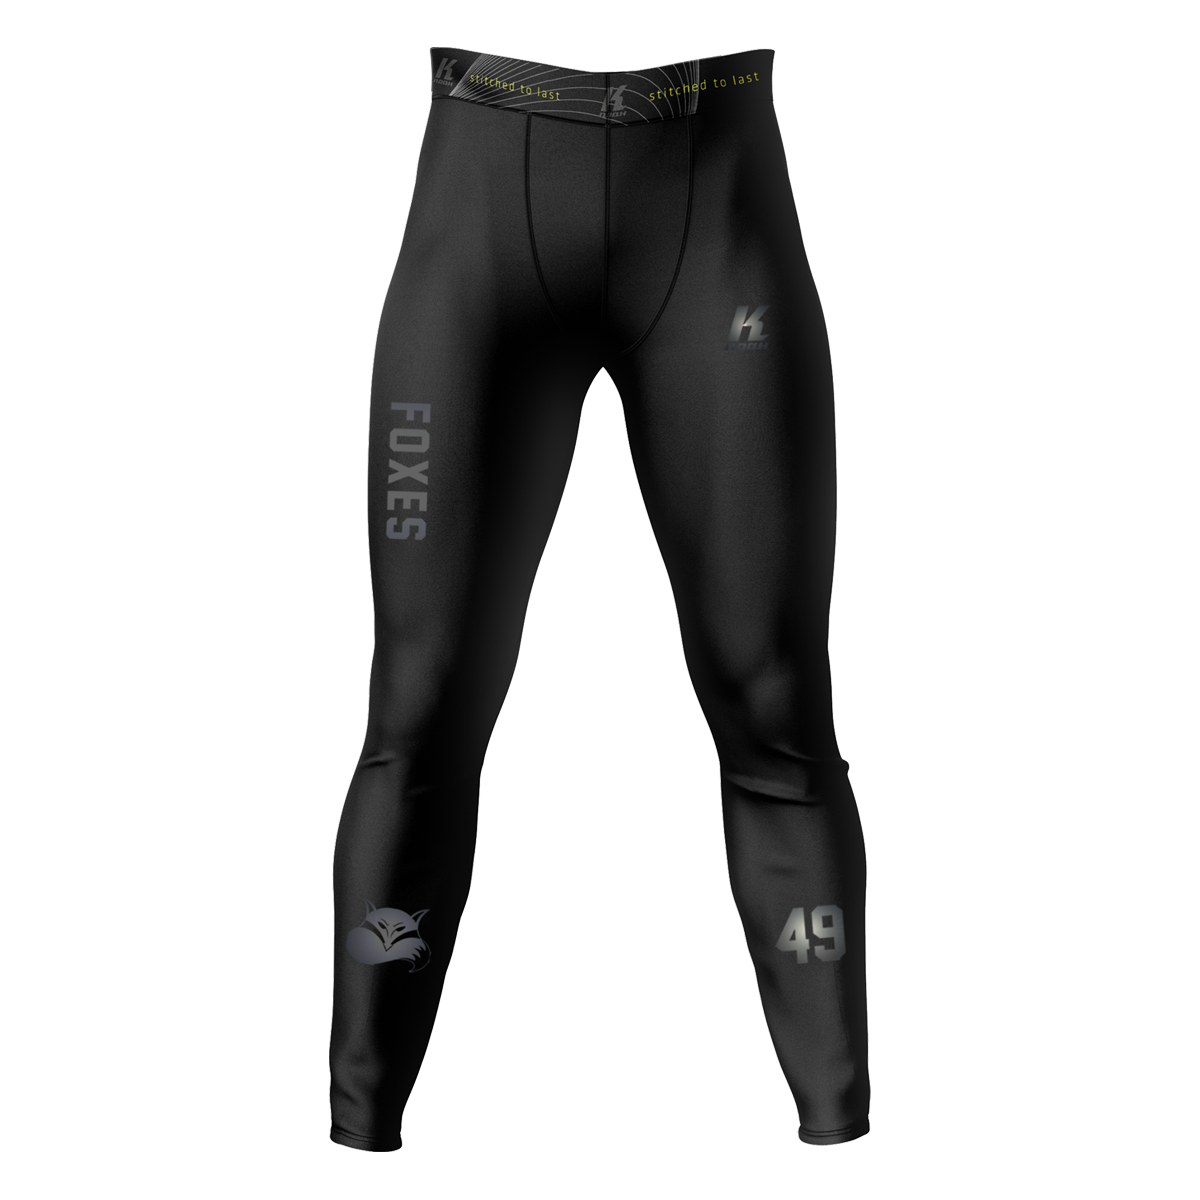 Foxes "Blackline" K.Tech Fiber Compression Pant BA0514 with Playernumber/Initials